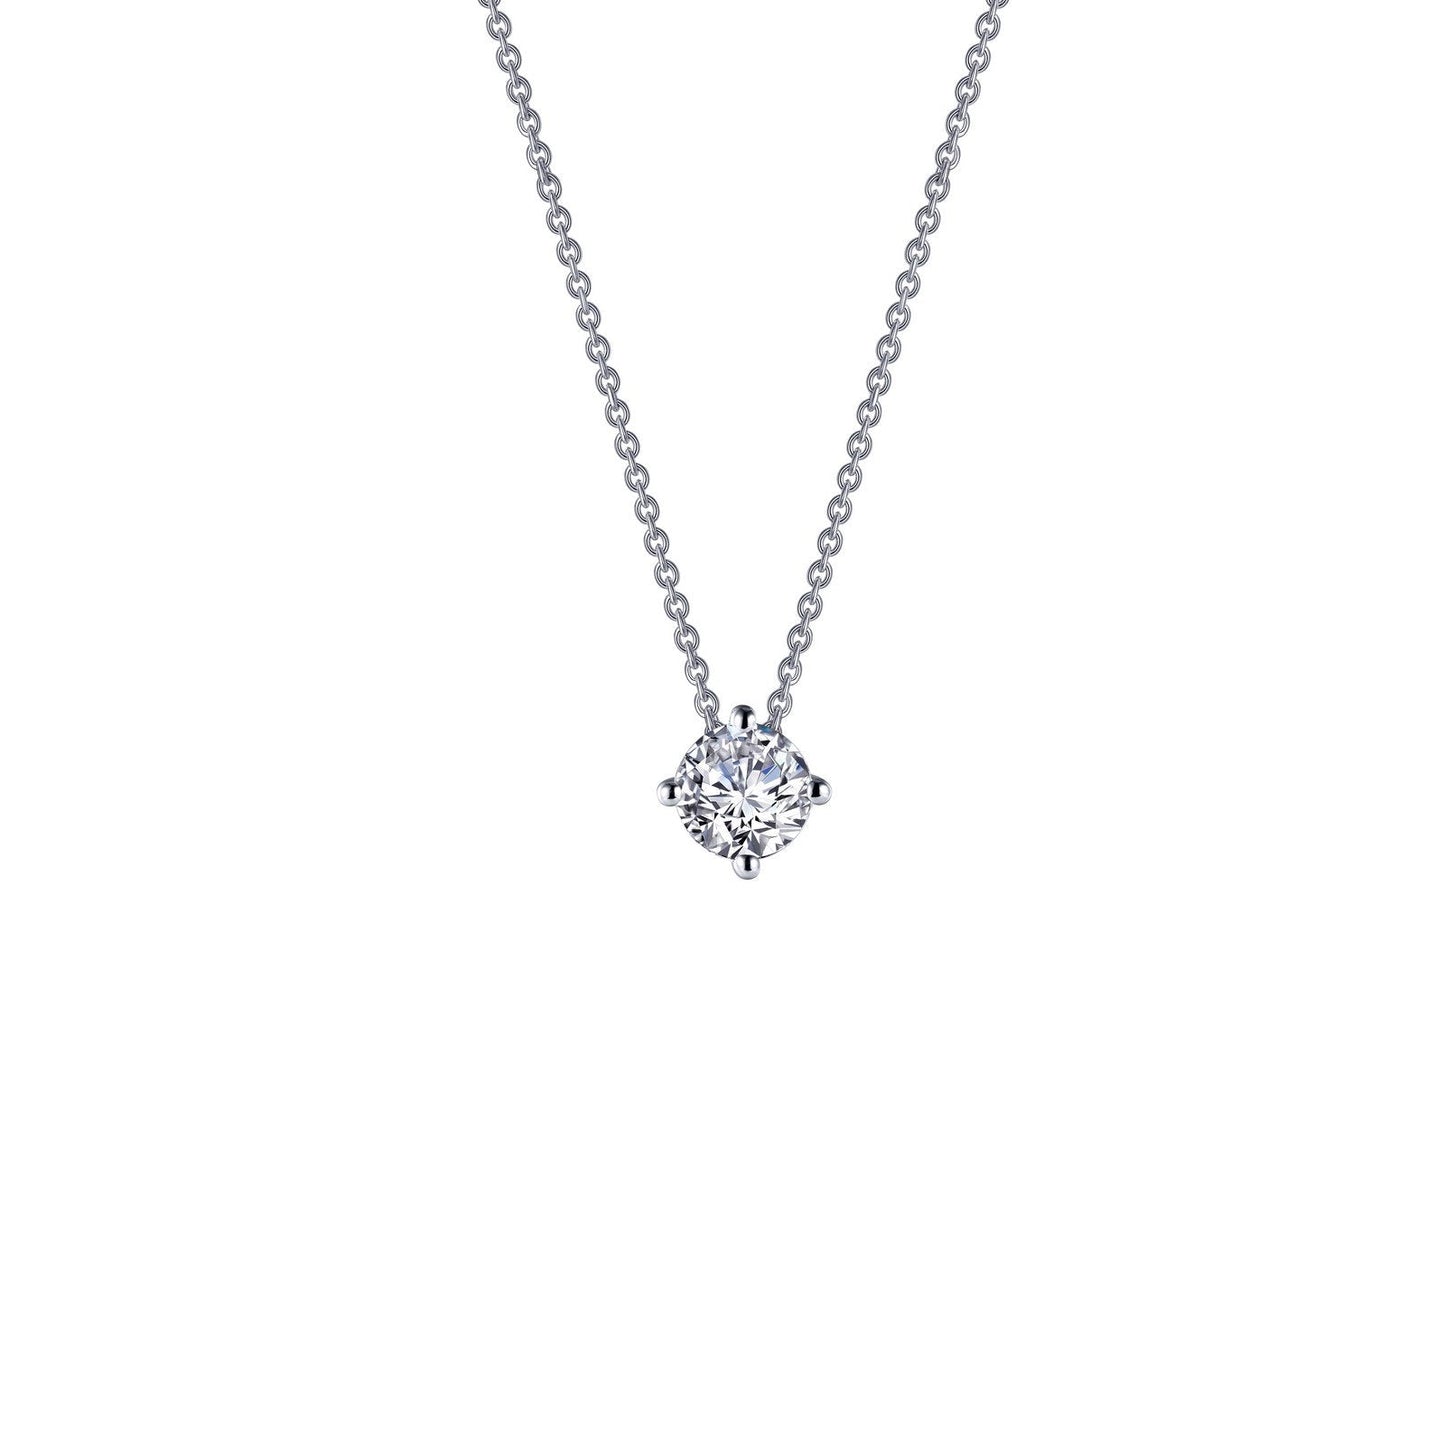 Load image into Gallery viewer, Lafonn 0.50 CTW Solitaire Necklace Simulated Diamond NECKLACES Platinum 0.7 CTS Approx. 5.0mm (W)
